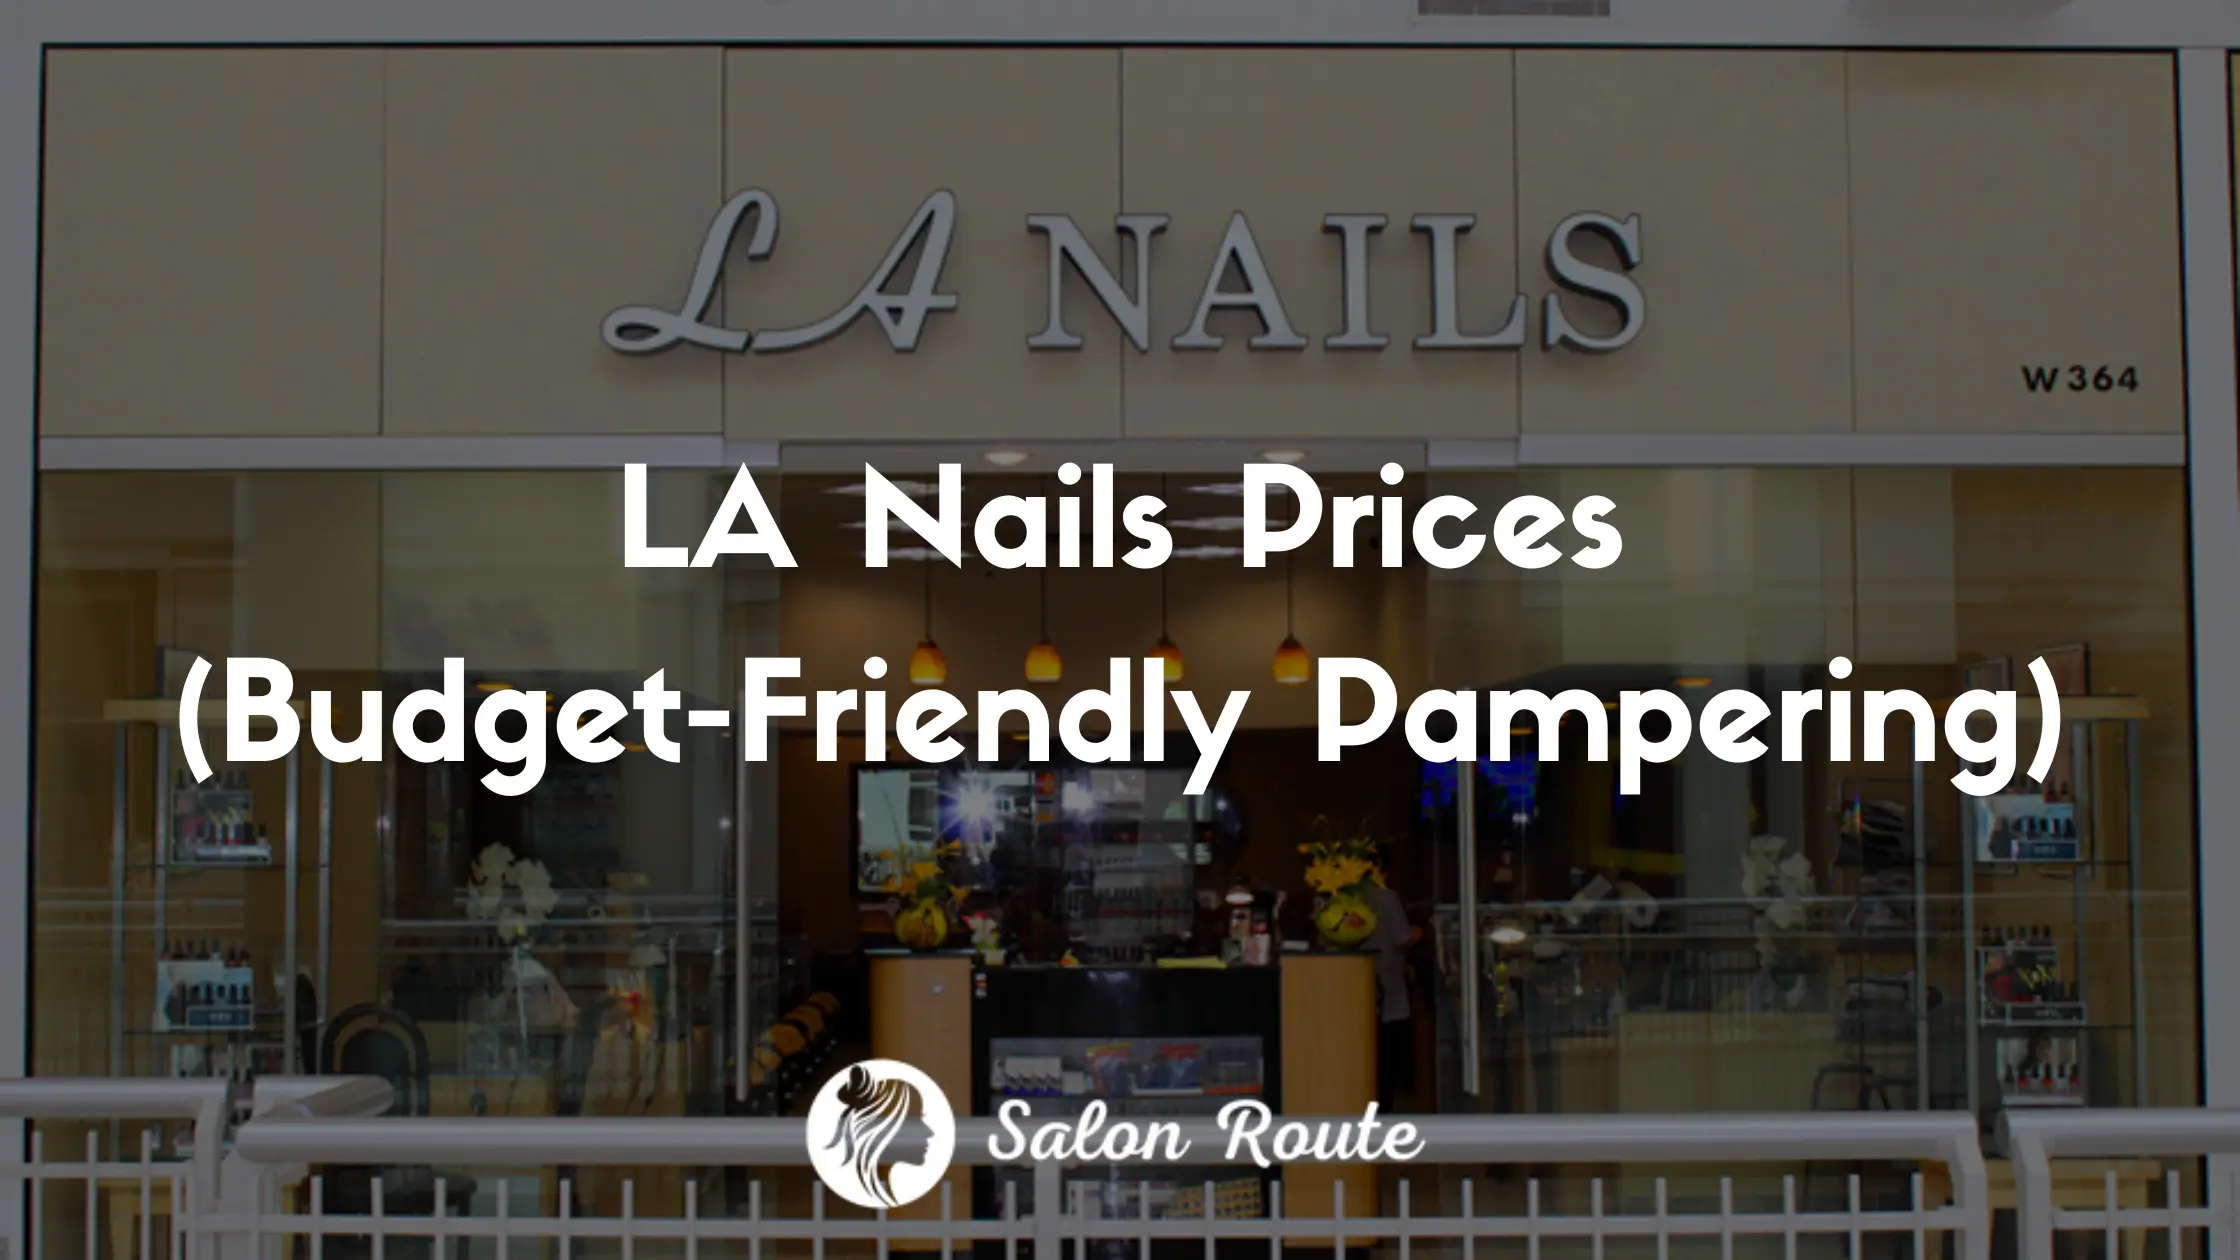 LA Nails Prices (Budget-Friendly Pampering)